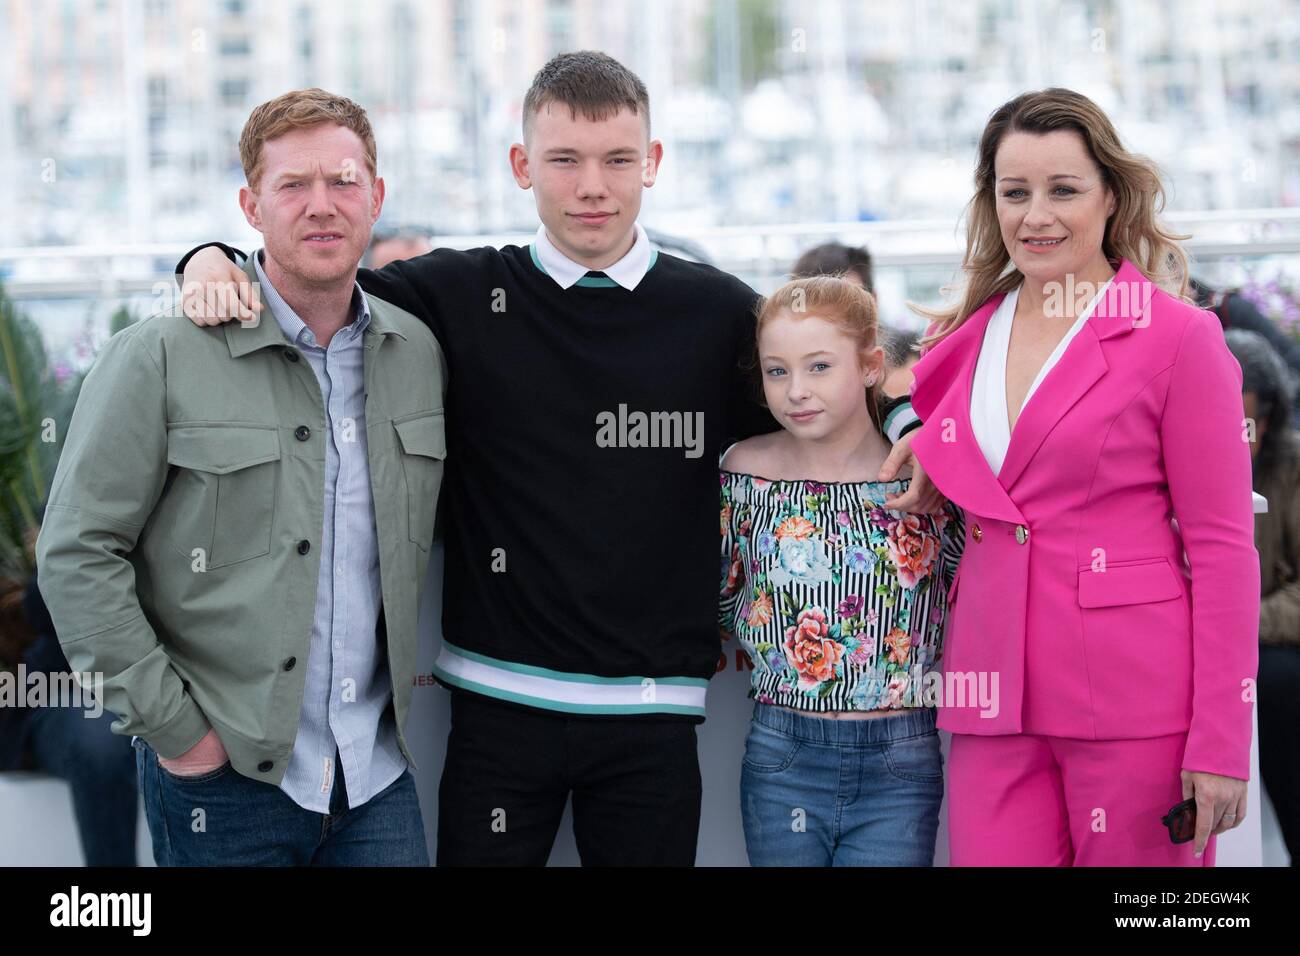 Kris Hitchen, Rhys Stone, Katie Proctor and Debbie Honeywood attending the Sorry We Missed You Photocall as part of the 72nd Cannes International Film Festival in Cannes, France on May 17, 2019. Photo by Aurore Marechal/ABACAPRESS.COM Stock Photo